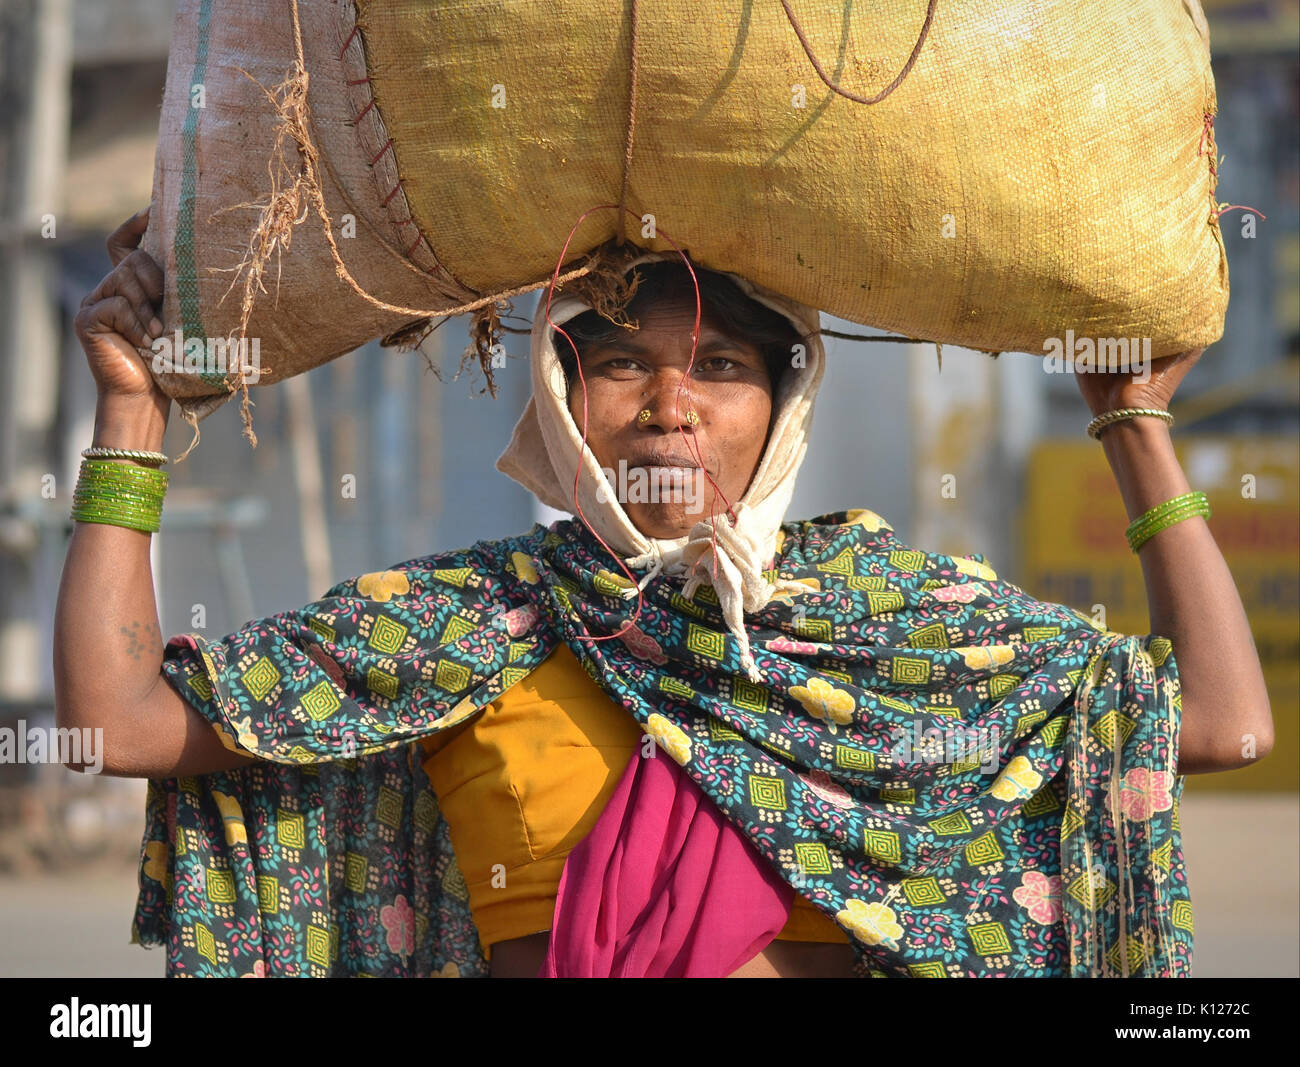 Indian Adivasi woman (tribal woman) with two distinctive golden nose studs carries on her head a bag of vegetables and poses for the camera. Stock Photo